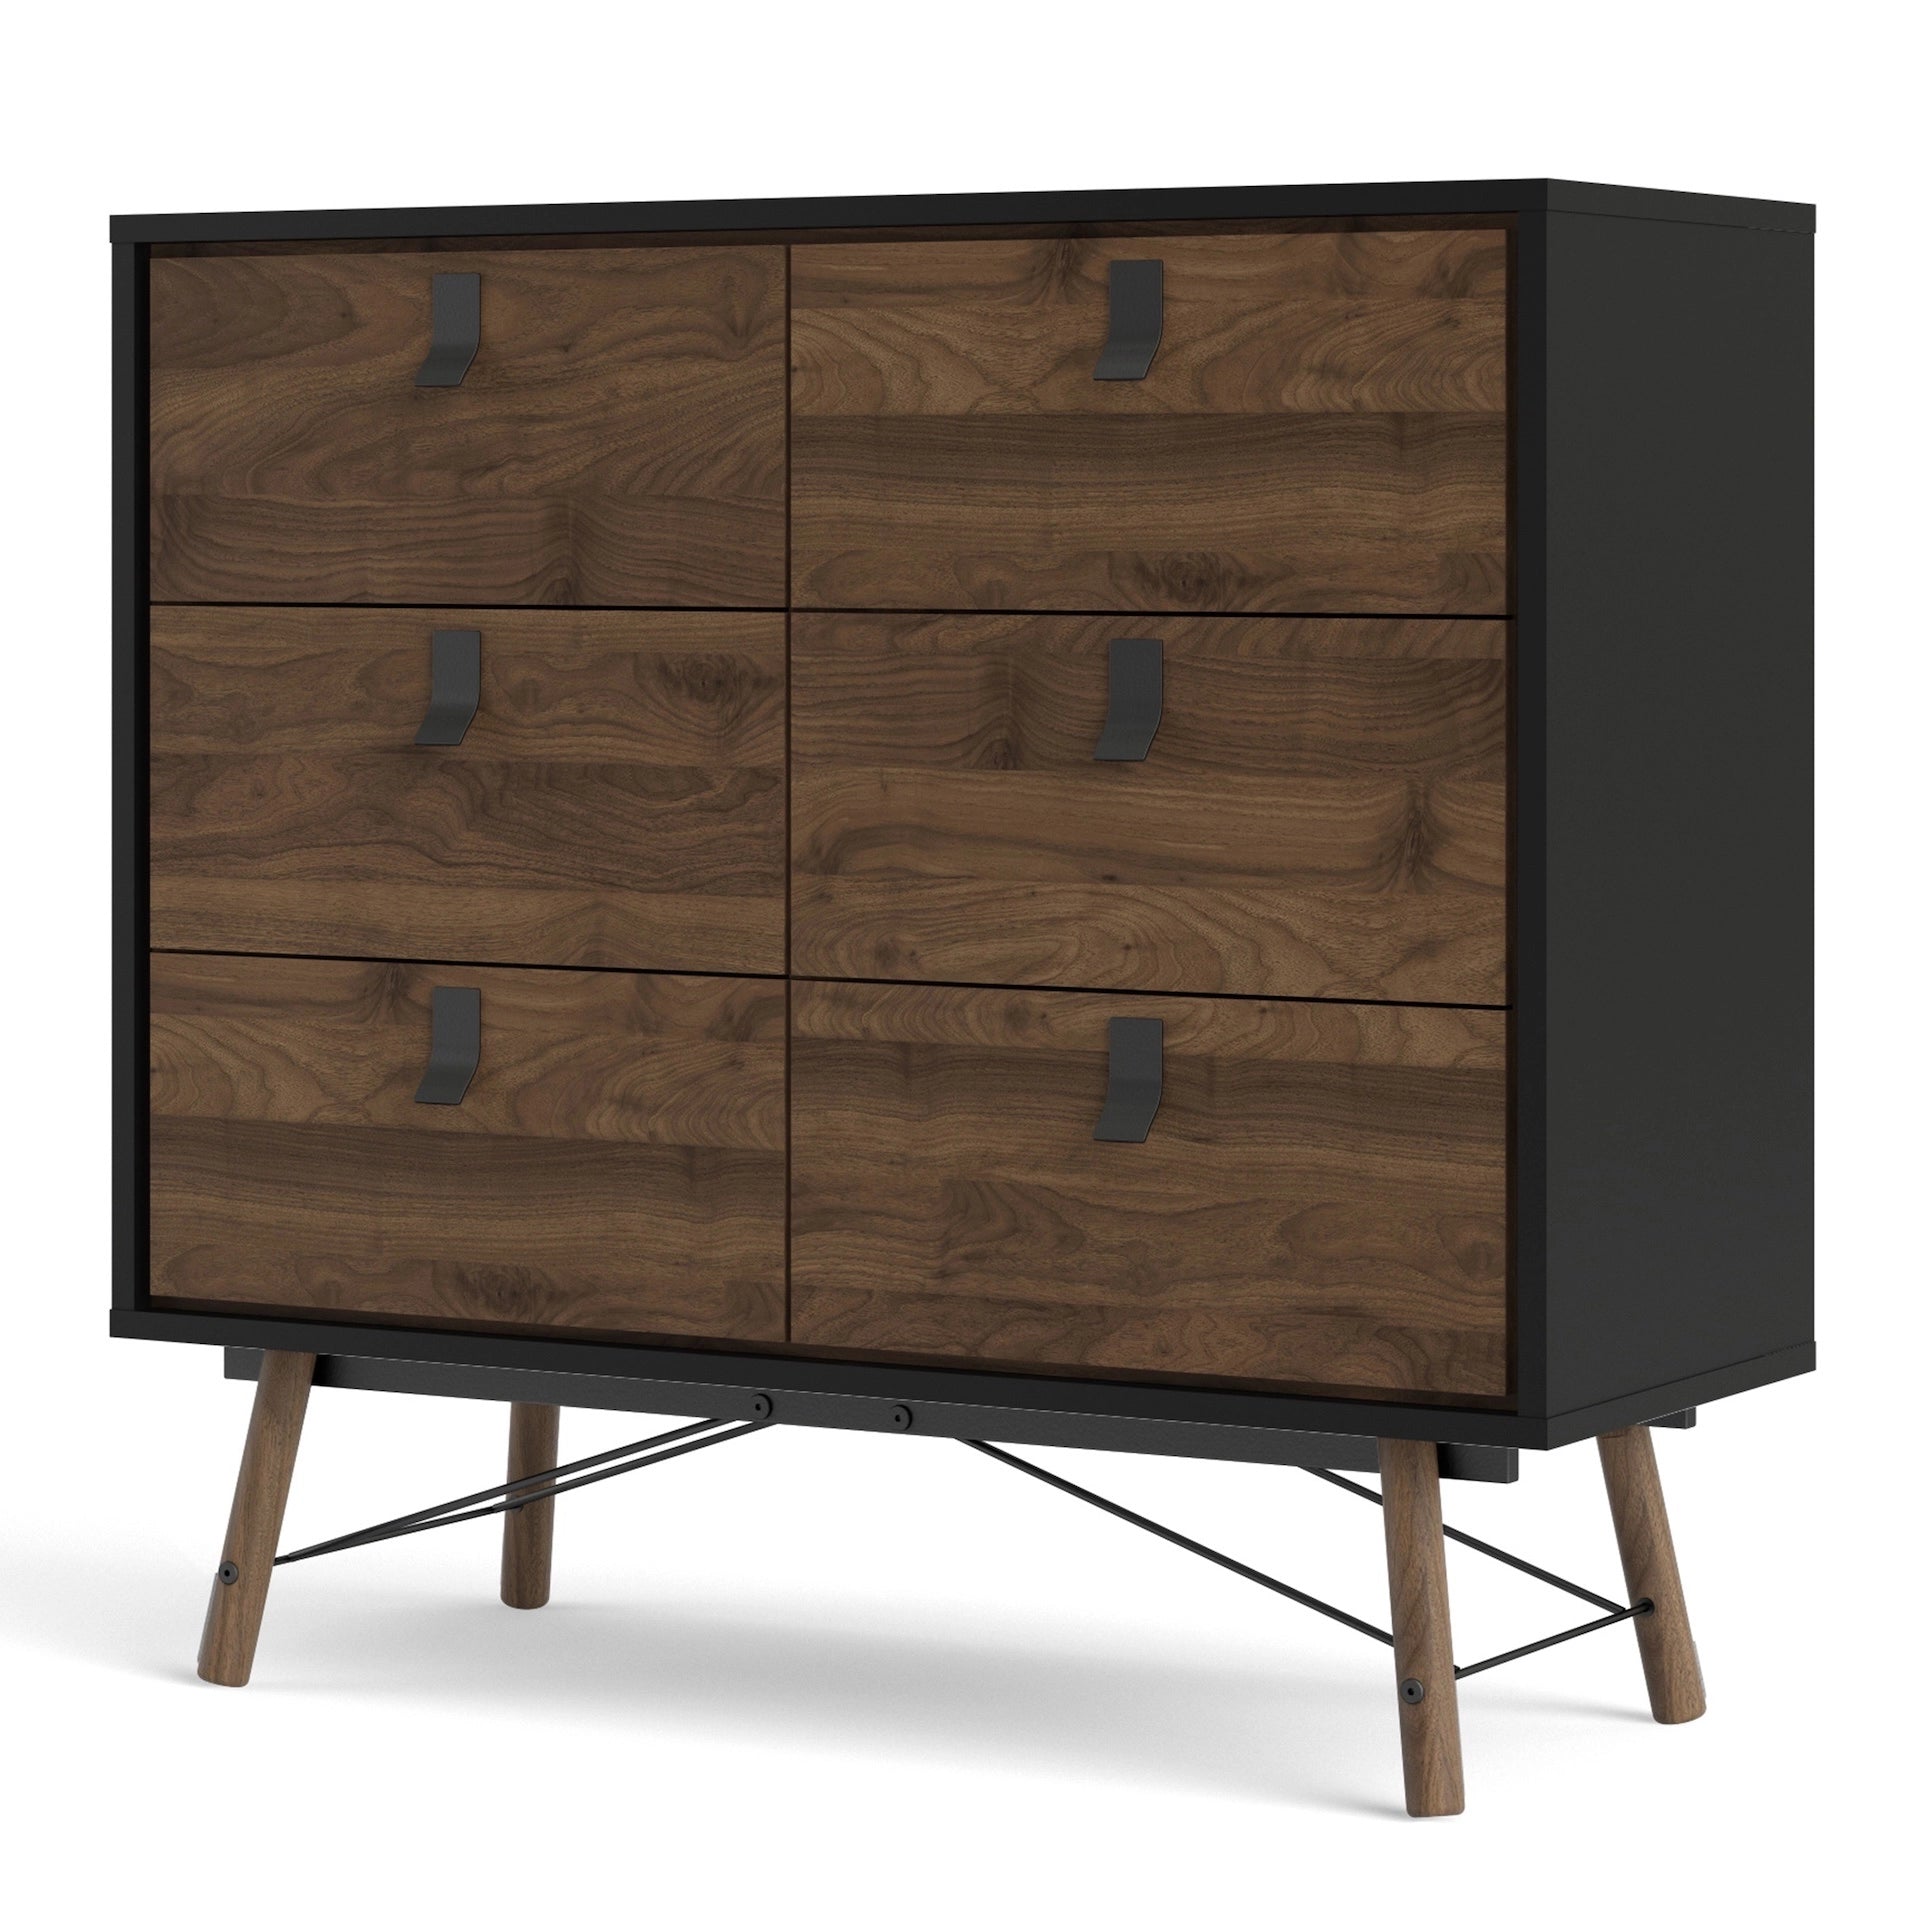 Furniture To Go Ry Double Chest of Drawers 6 Drawers in Matt Black Walnut